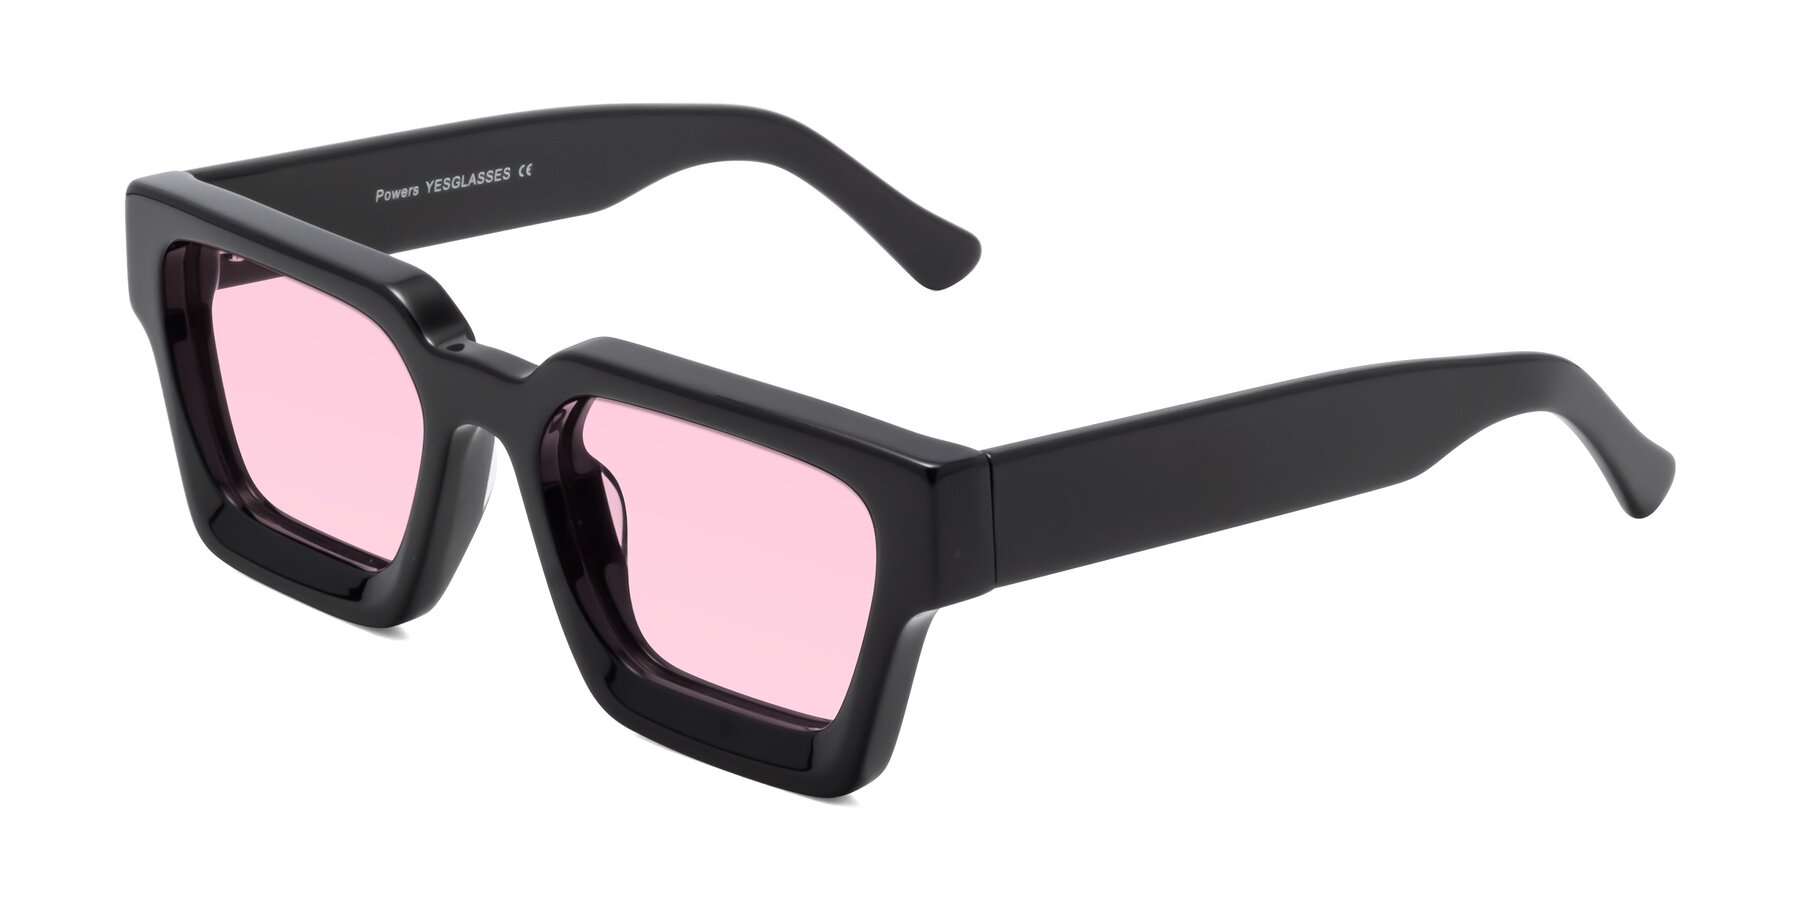 Angle of Powers in Black with Light Pink Tinted Lenses